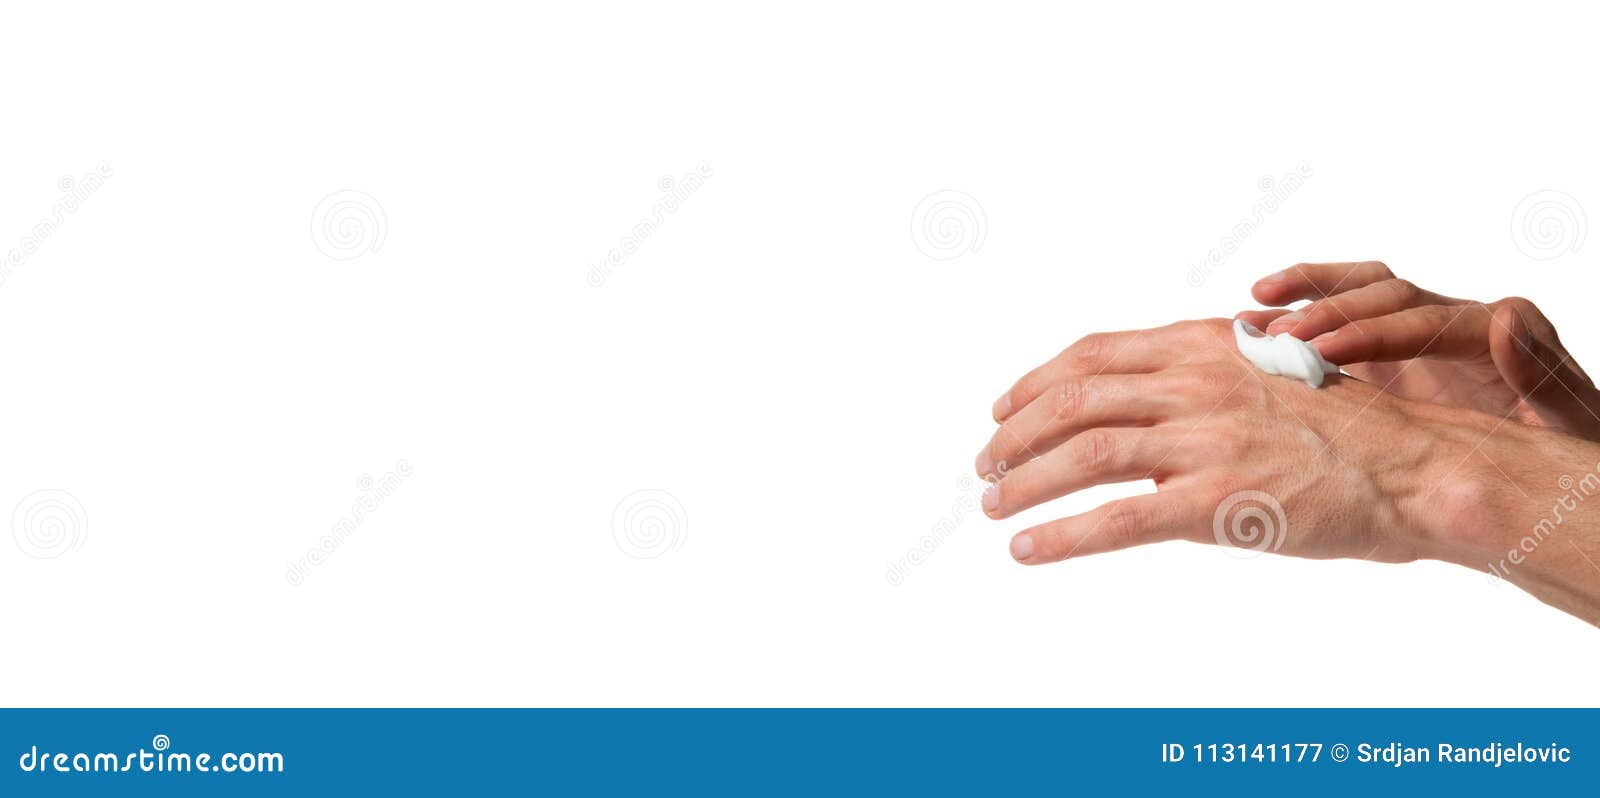 male working hands put on a moisturize cream for soft skin  on a white background, beauty concept